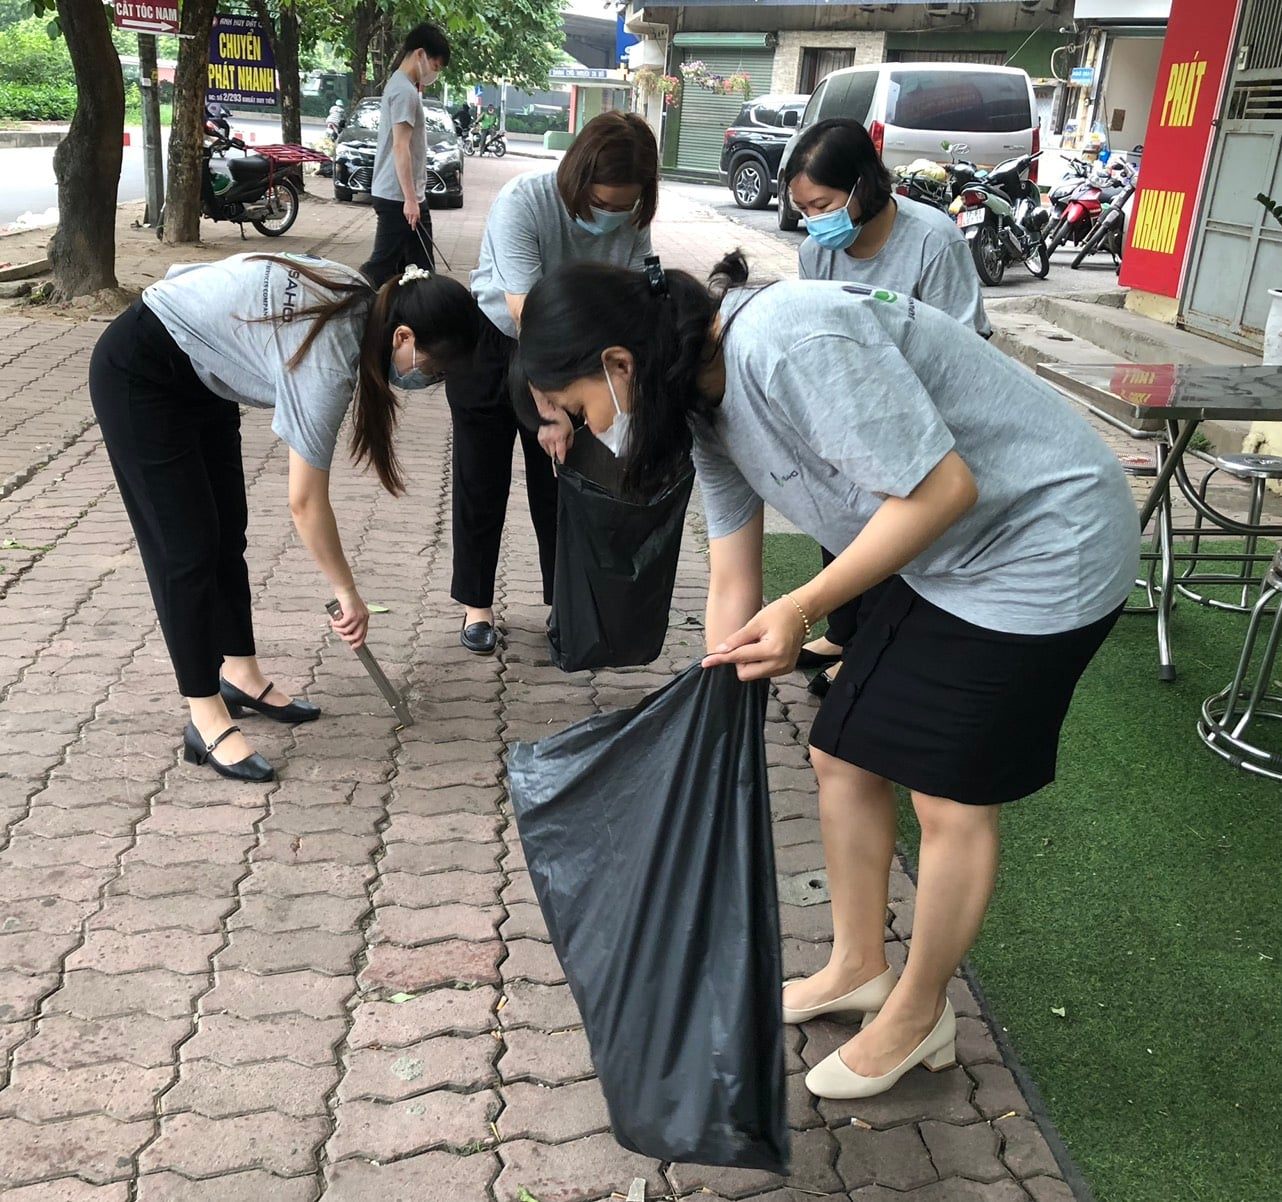 This is the second time VISAHO organizes an activity to pick up trash to protect the environment